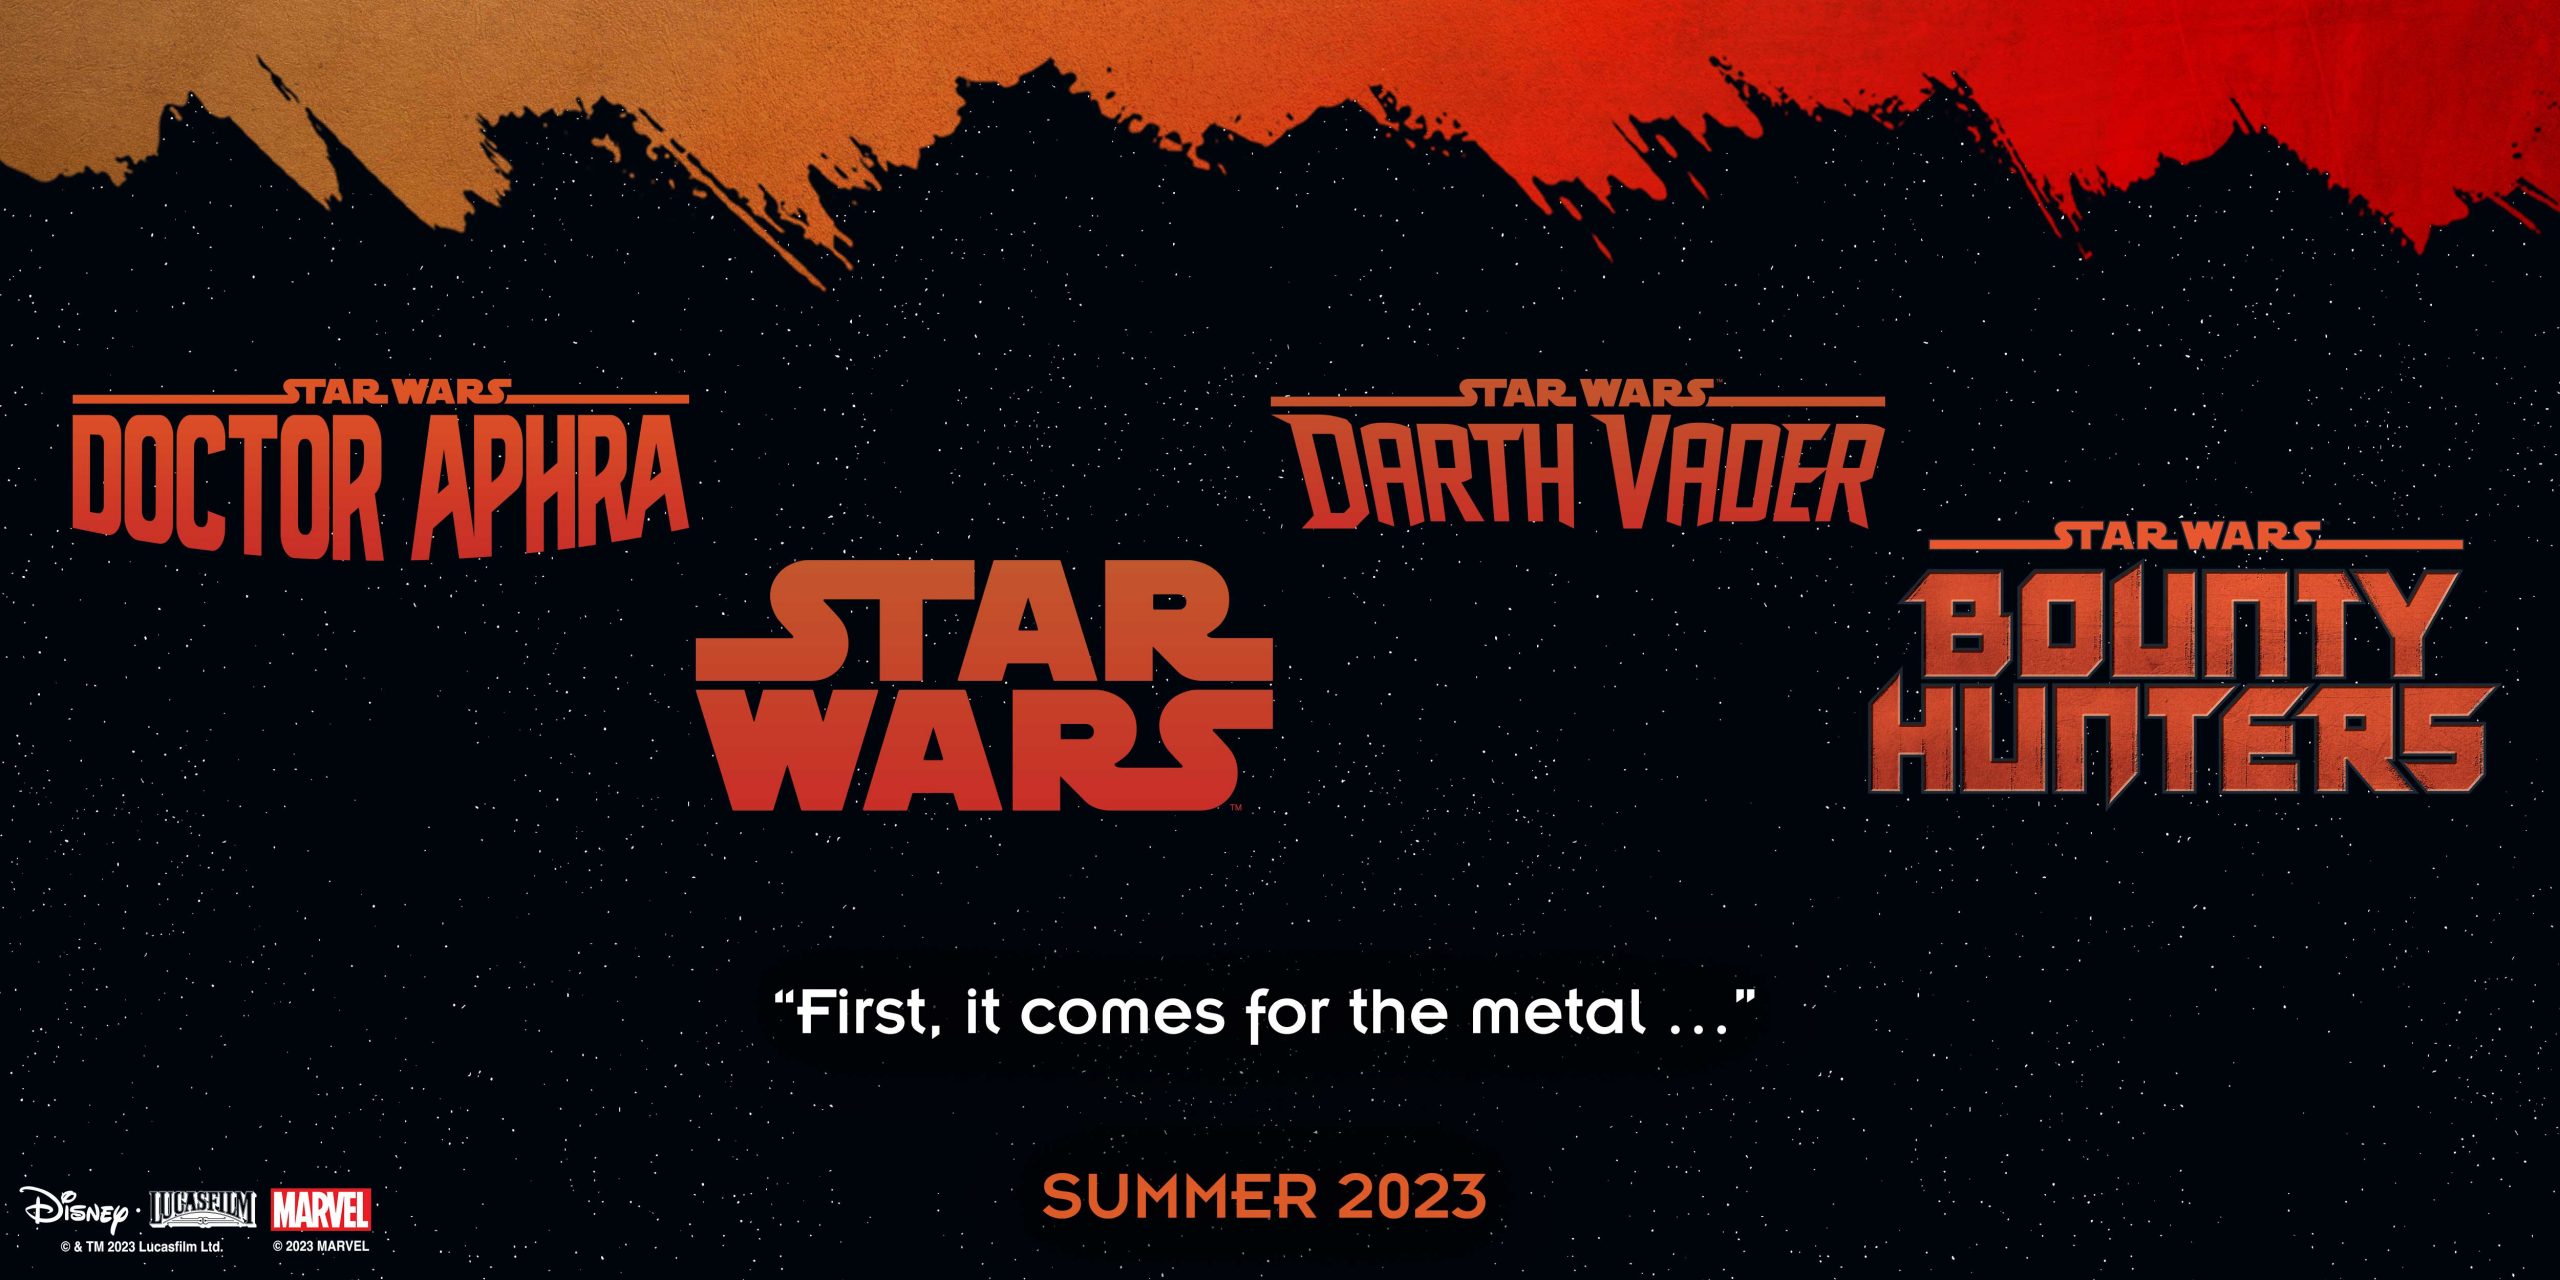 New Star Wars comics crossover coming in 2023